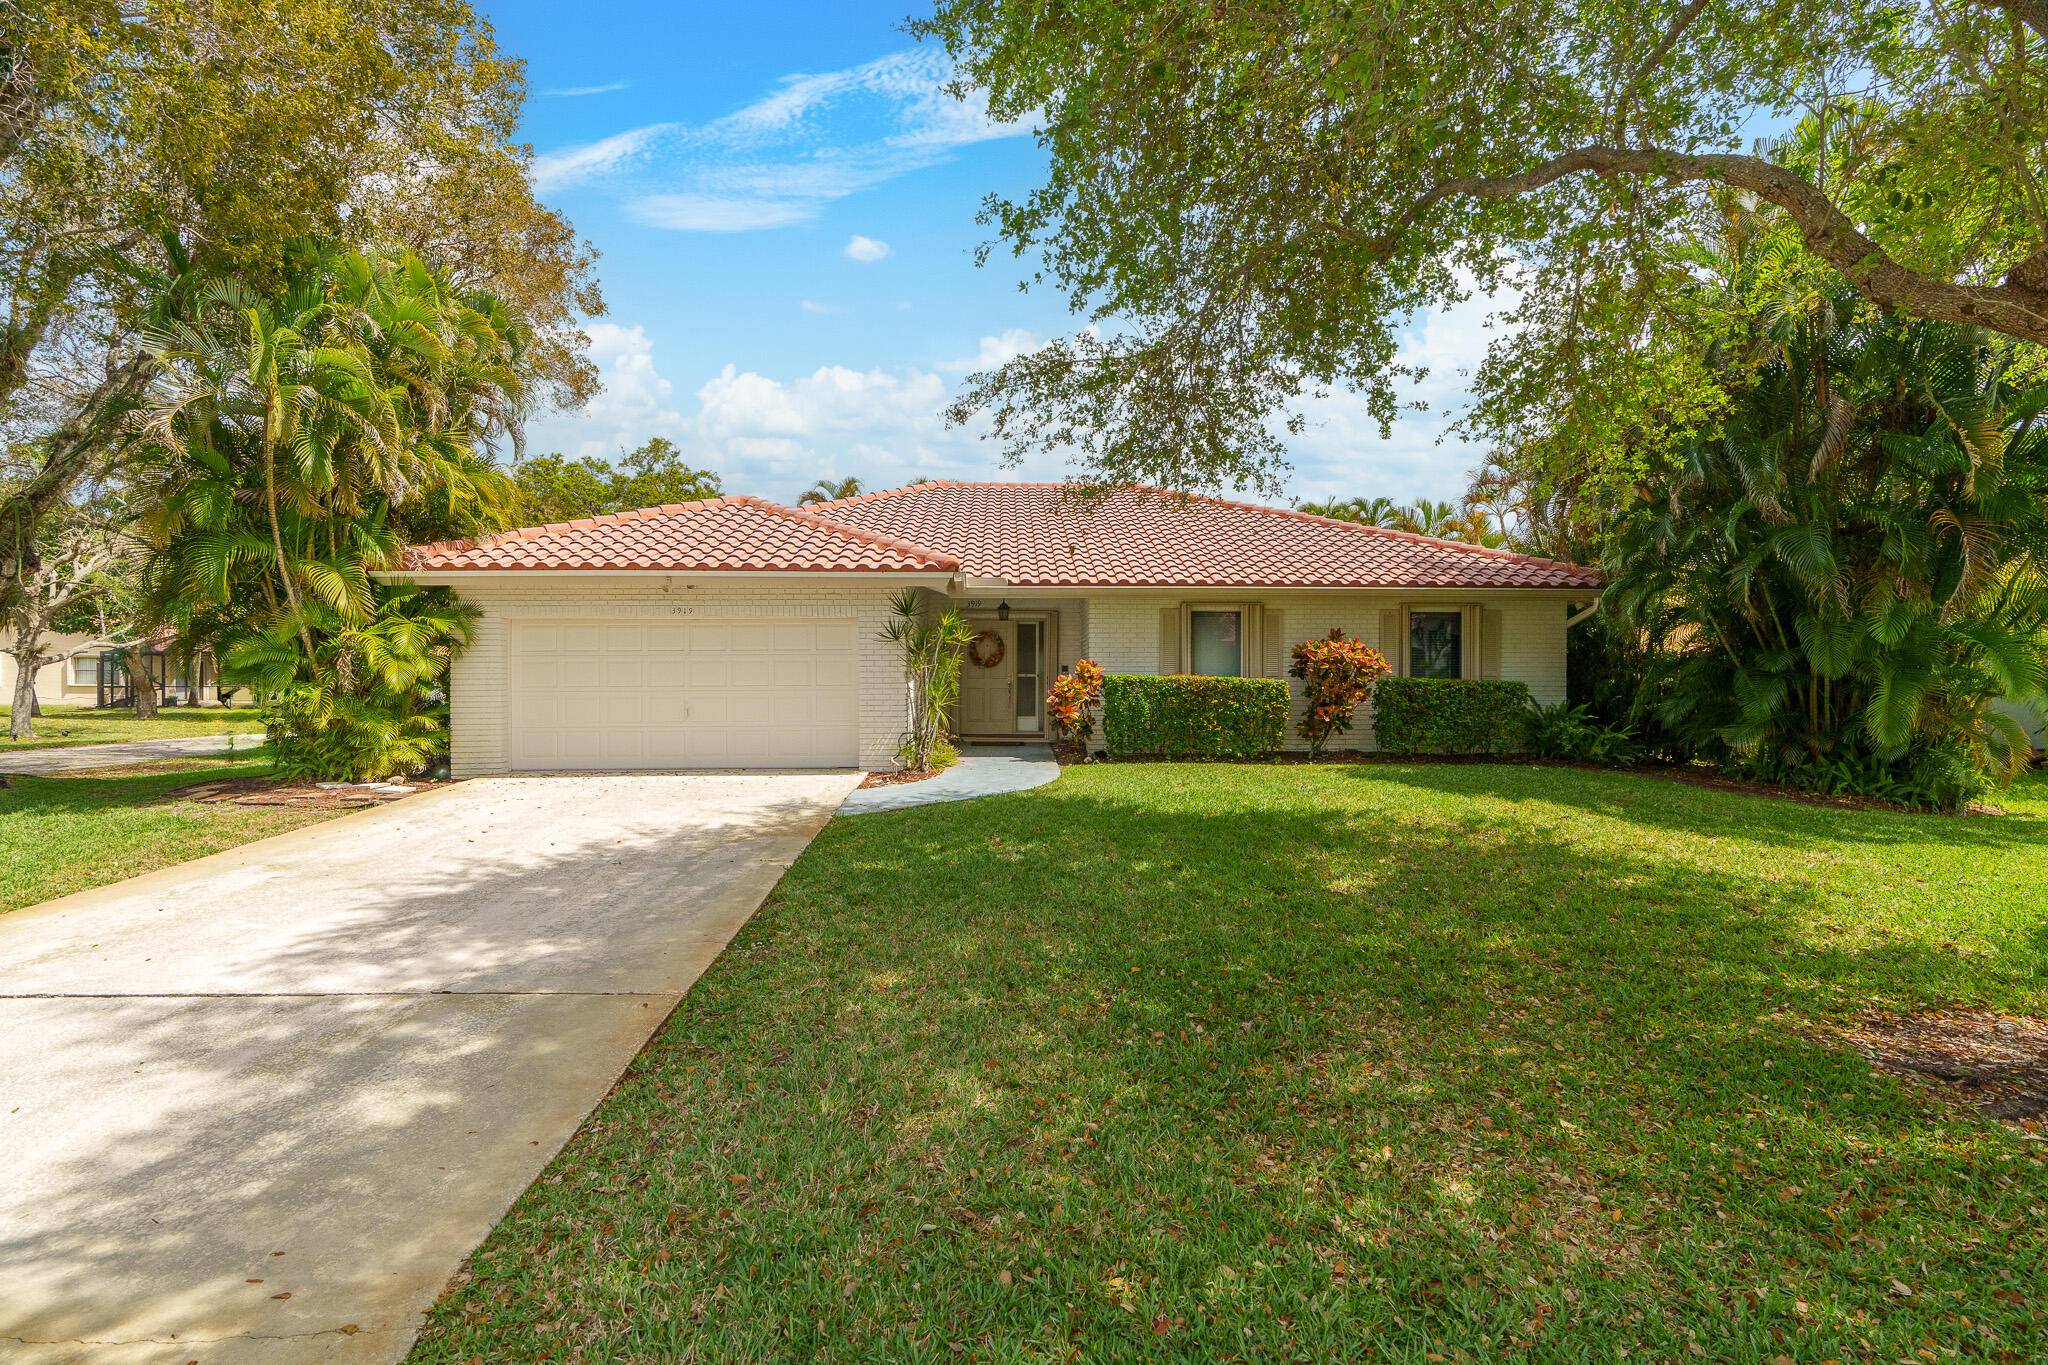 Charming Coral Springs Single Family pool home nestled on a corner lot in The Crossings.